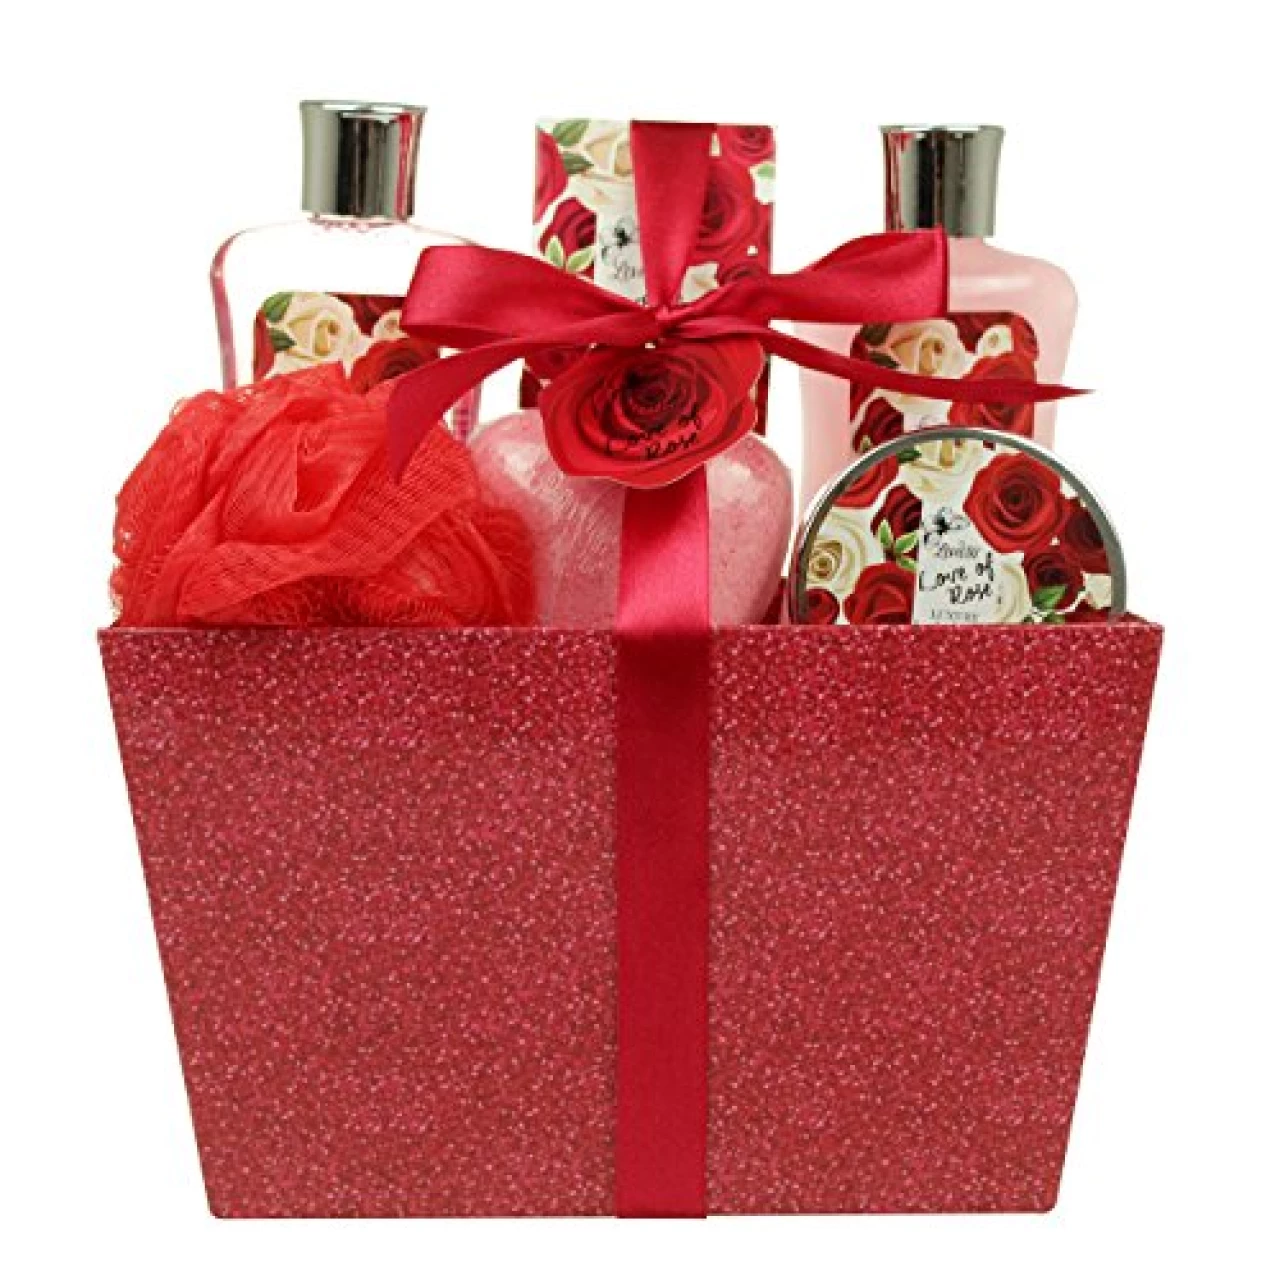 Christmas Bath and Body - Spa Gift Baskets for Women &amp; Girls